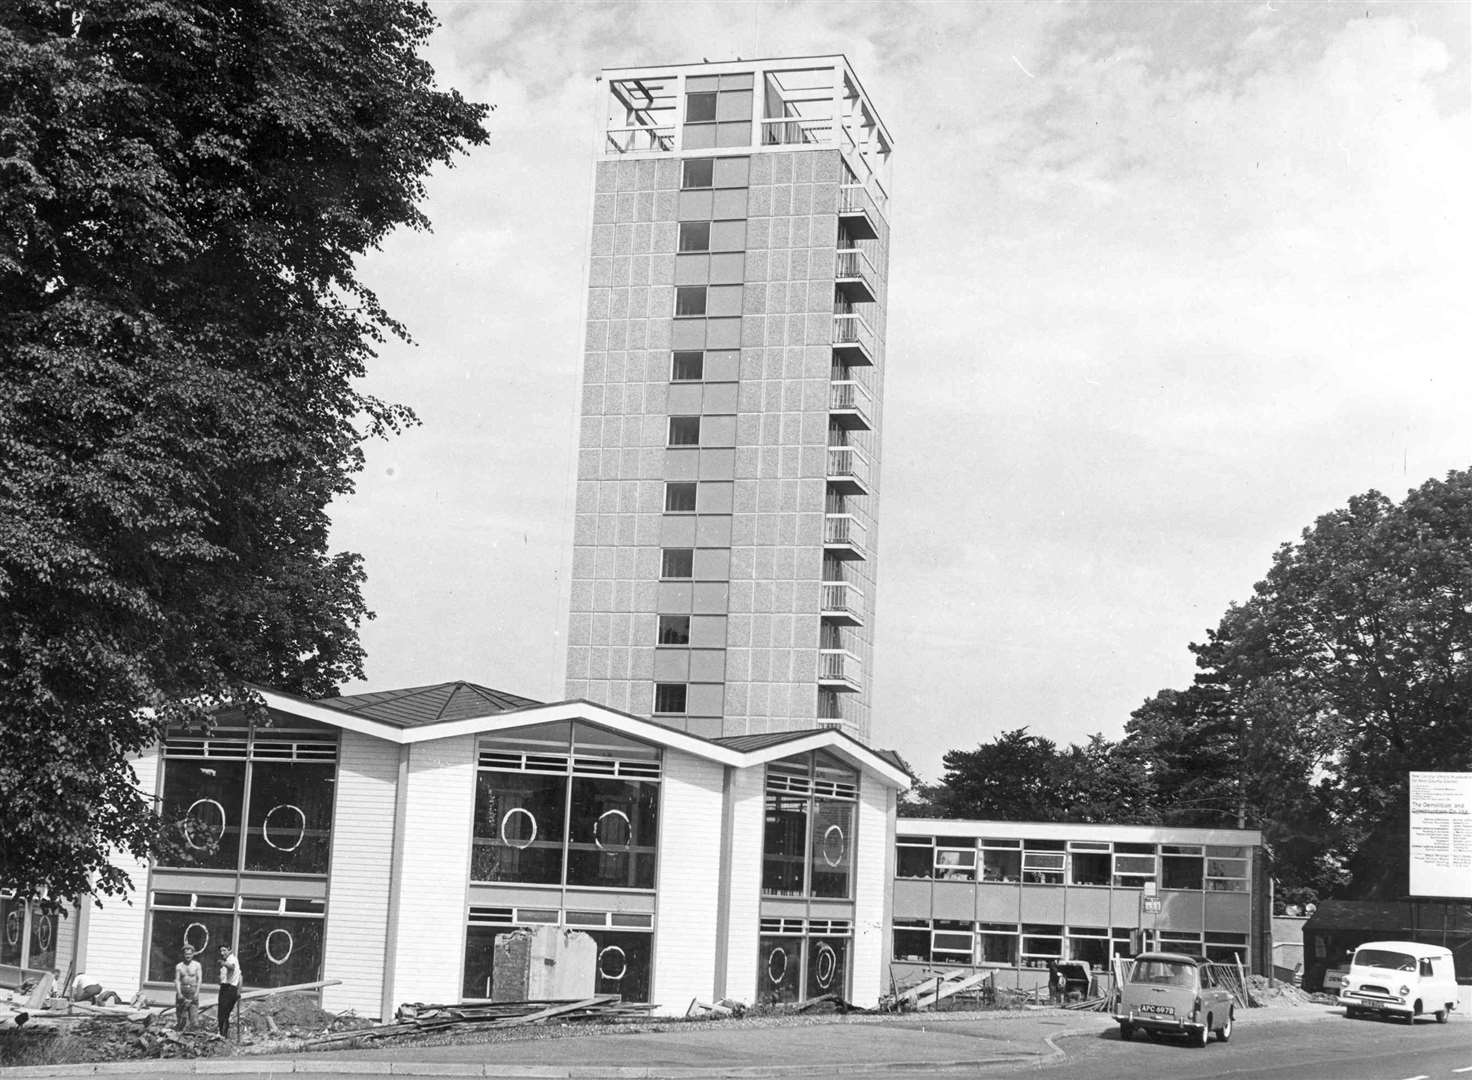 The Springfield Library site pictured in 1964